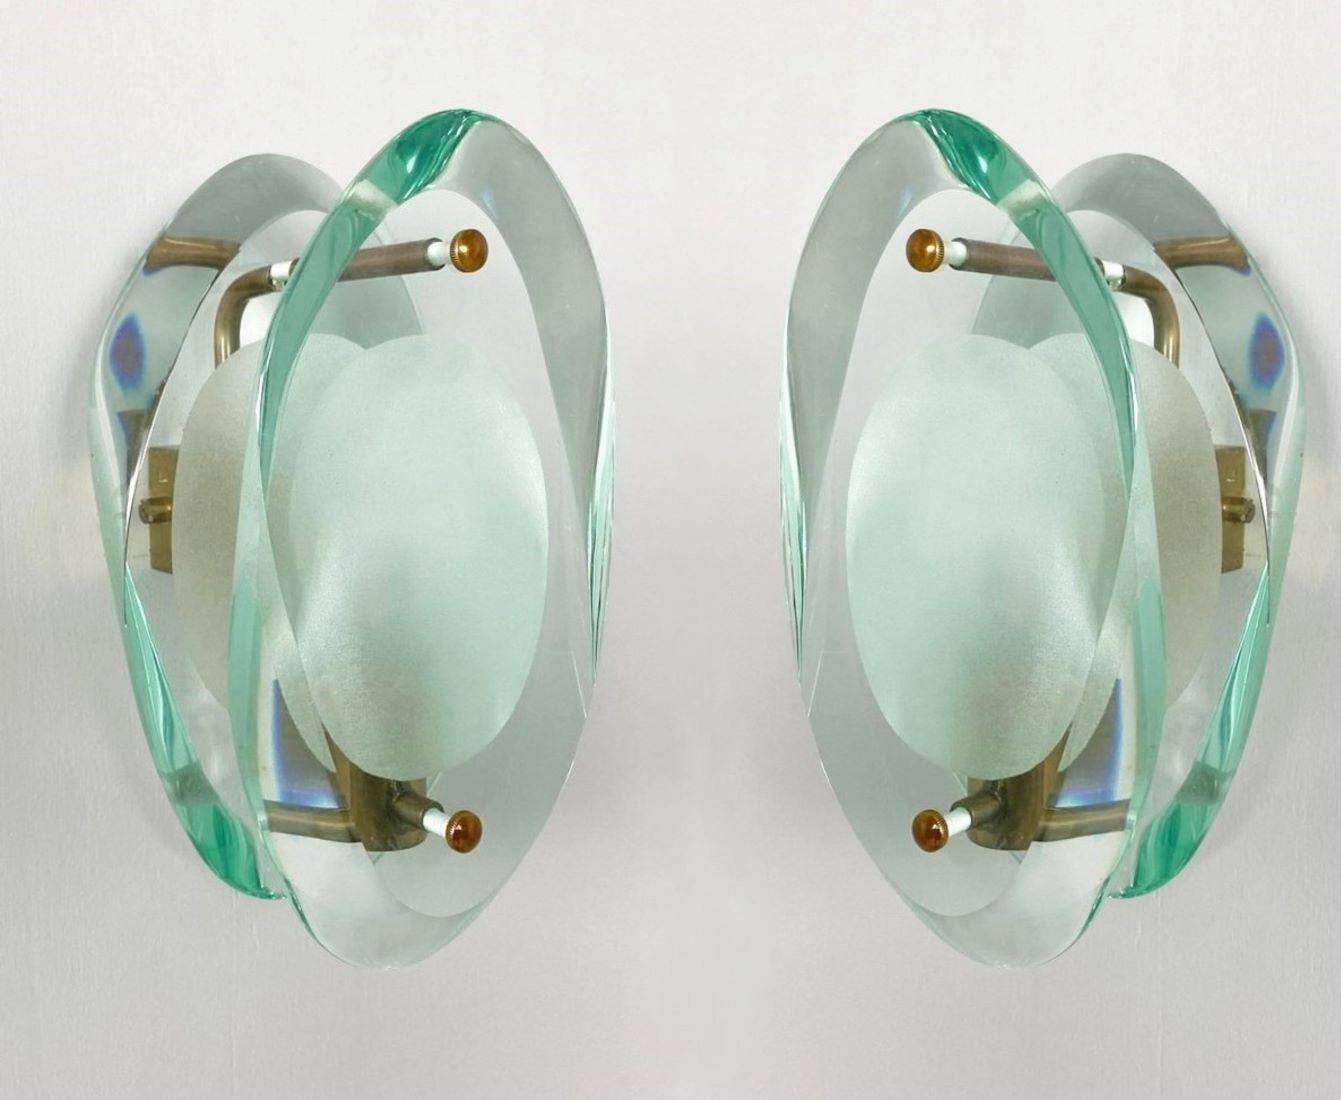 Pair of light sconces by Max Ingrand for Fontana Arte, Model 2093, Italy, 1960-1961. Organically shaped double lens cut panels of thick Murano profiled polished Murano glass with etched glass centers, polished brass mounted. The Model 2093 is one of